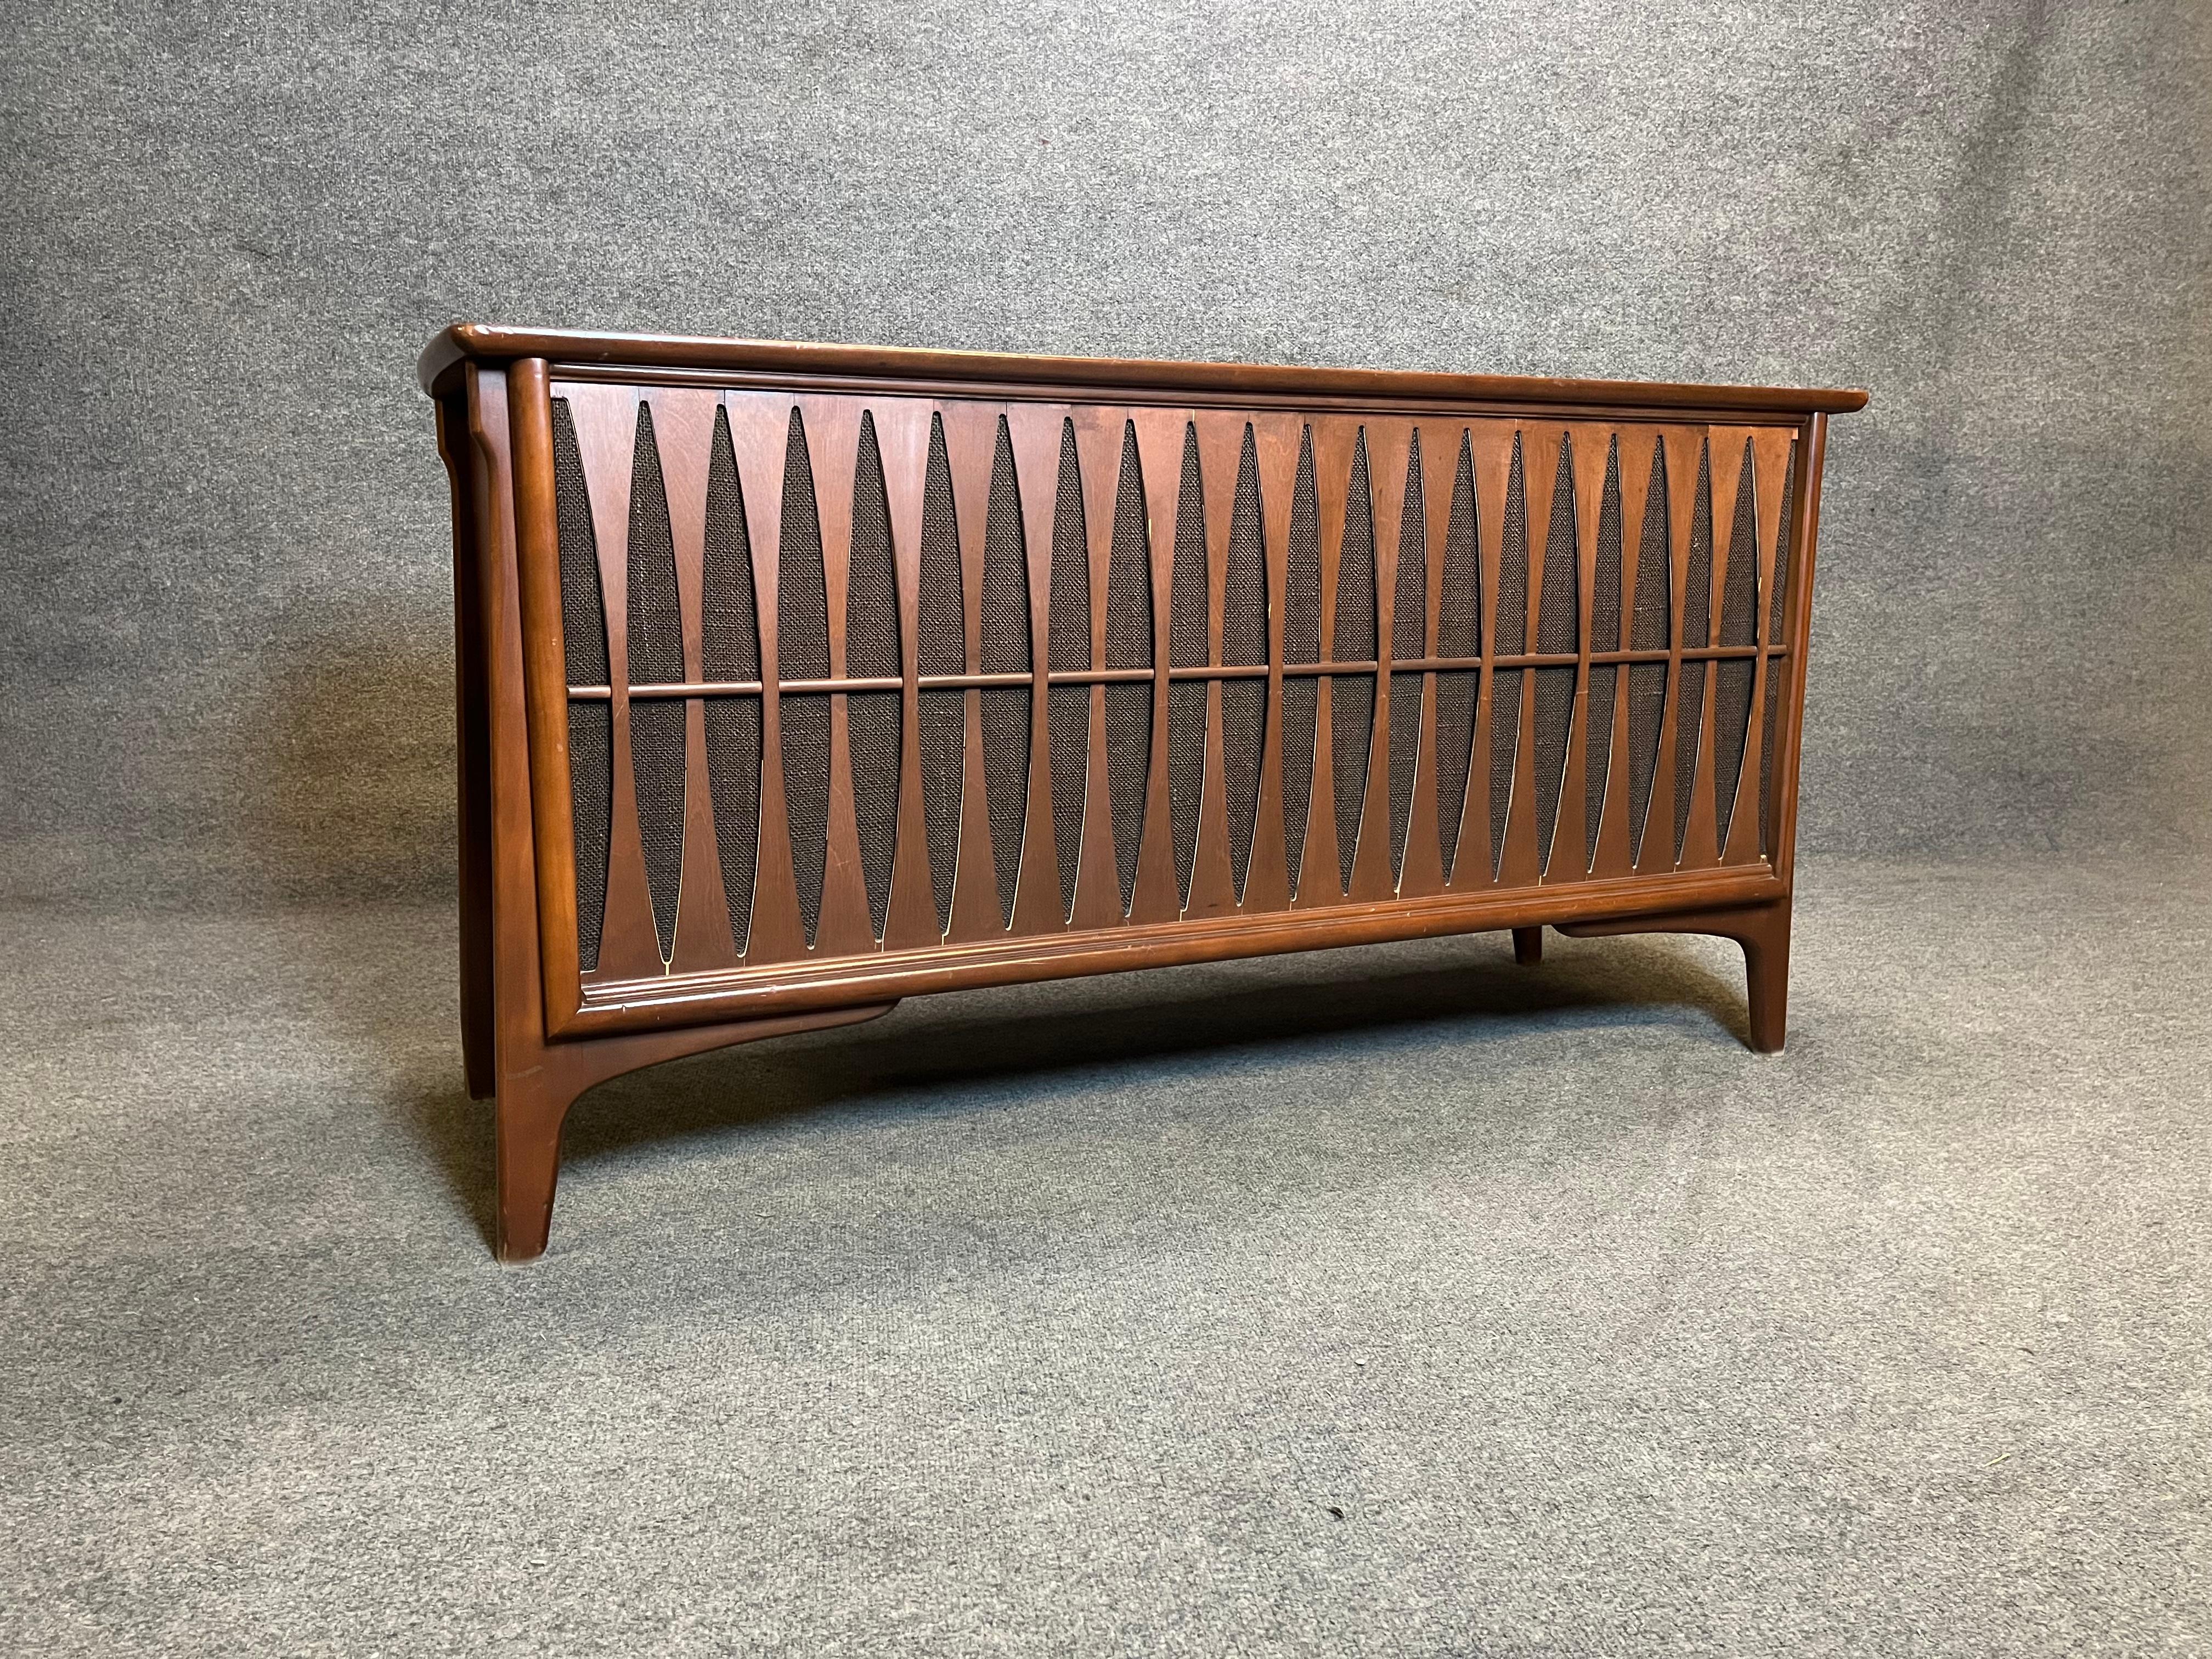 This rare RCA console stereo features one of the best looking Mid Century designs that we have seen. The entire front is lined with curved walnut slats that are bent around a horizontal dowel. The effect is reminiscent of Broyhill Brasilia designs.